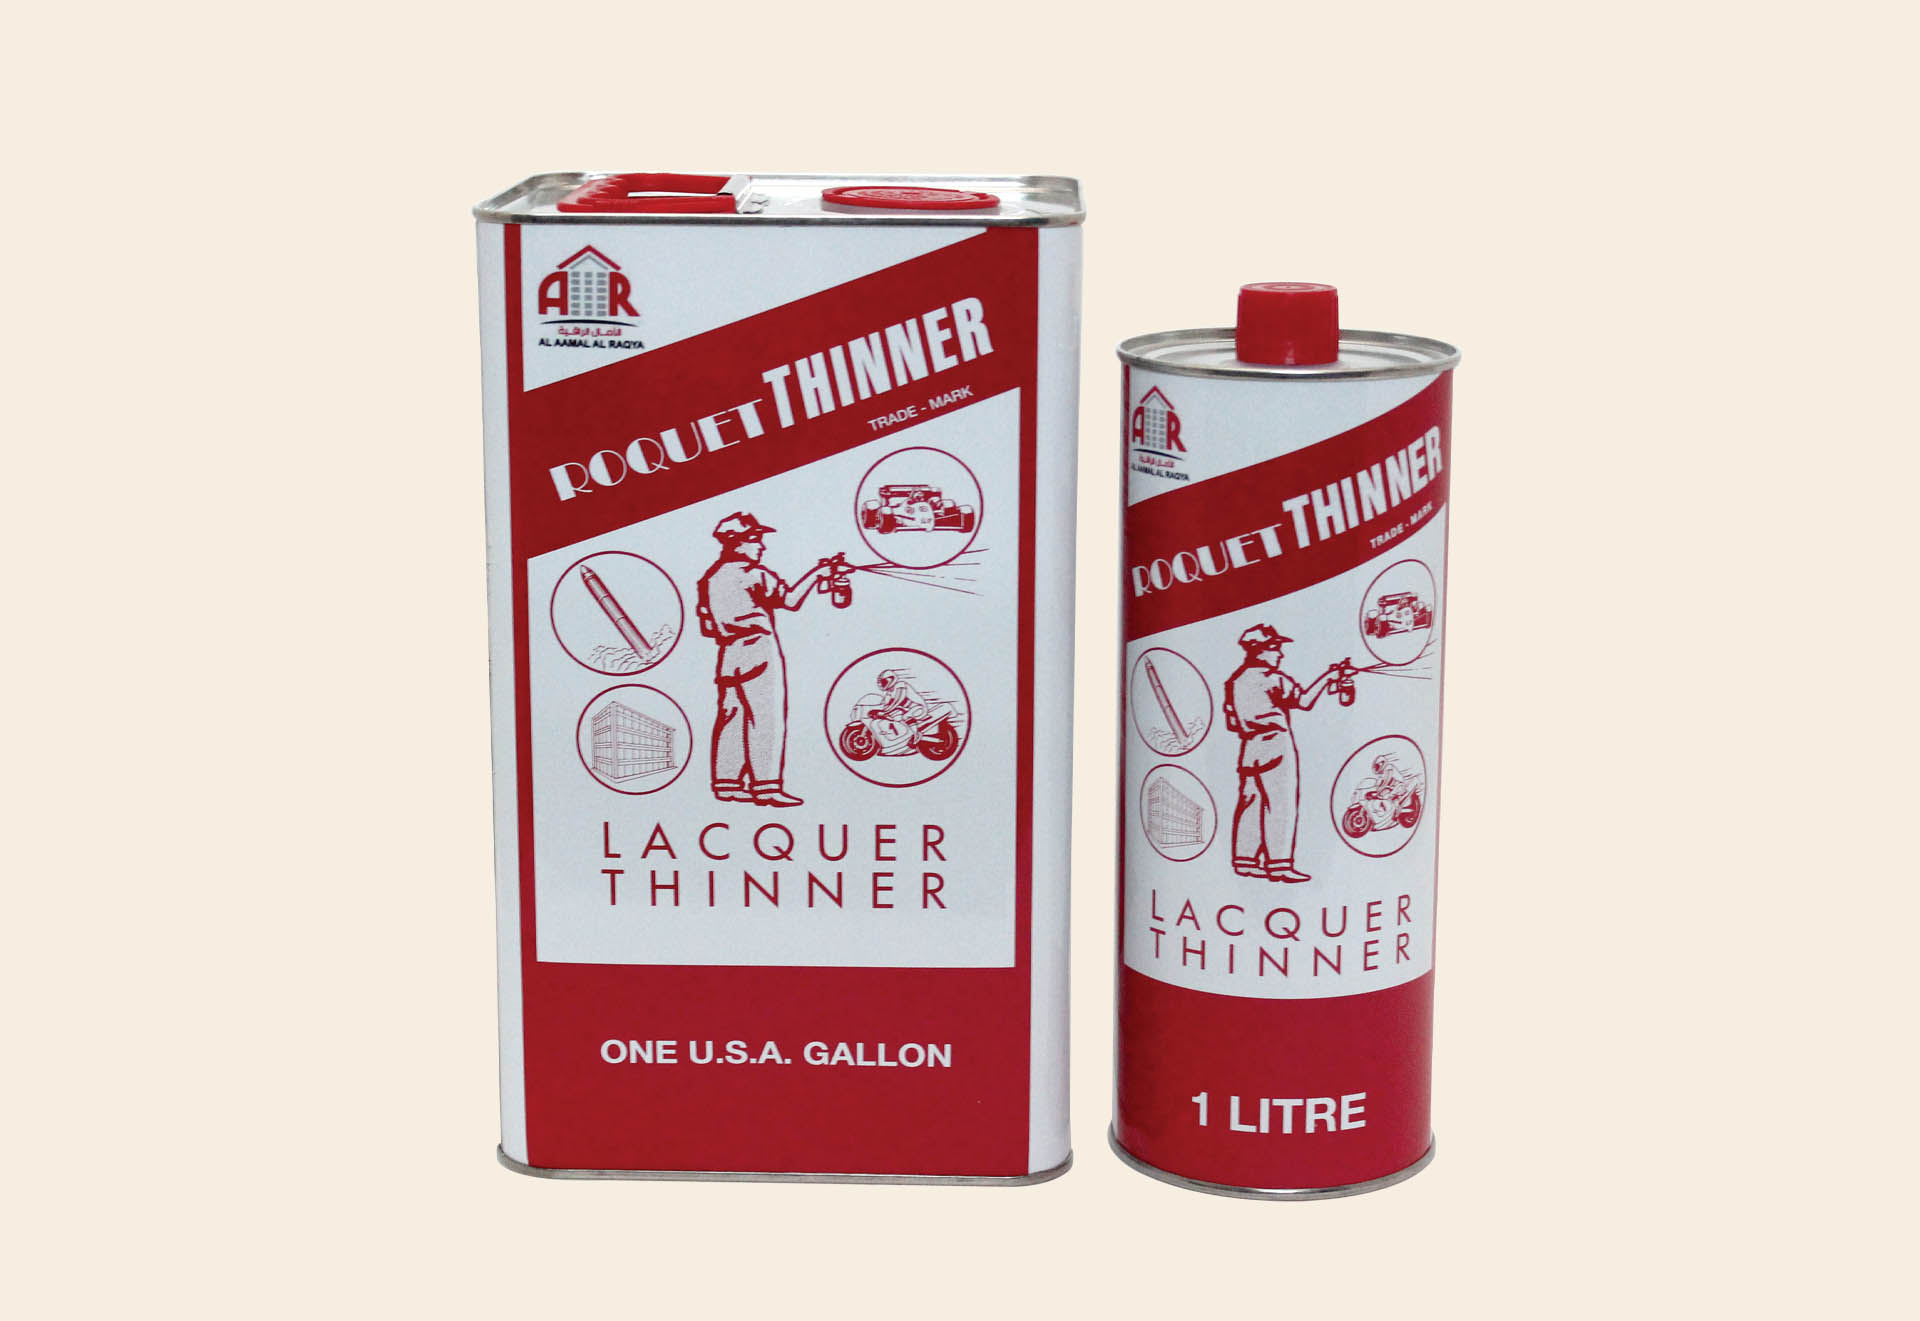 LACQUER THINNER – Italian